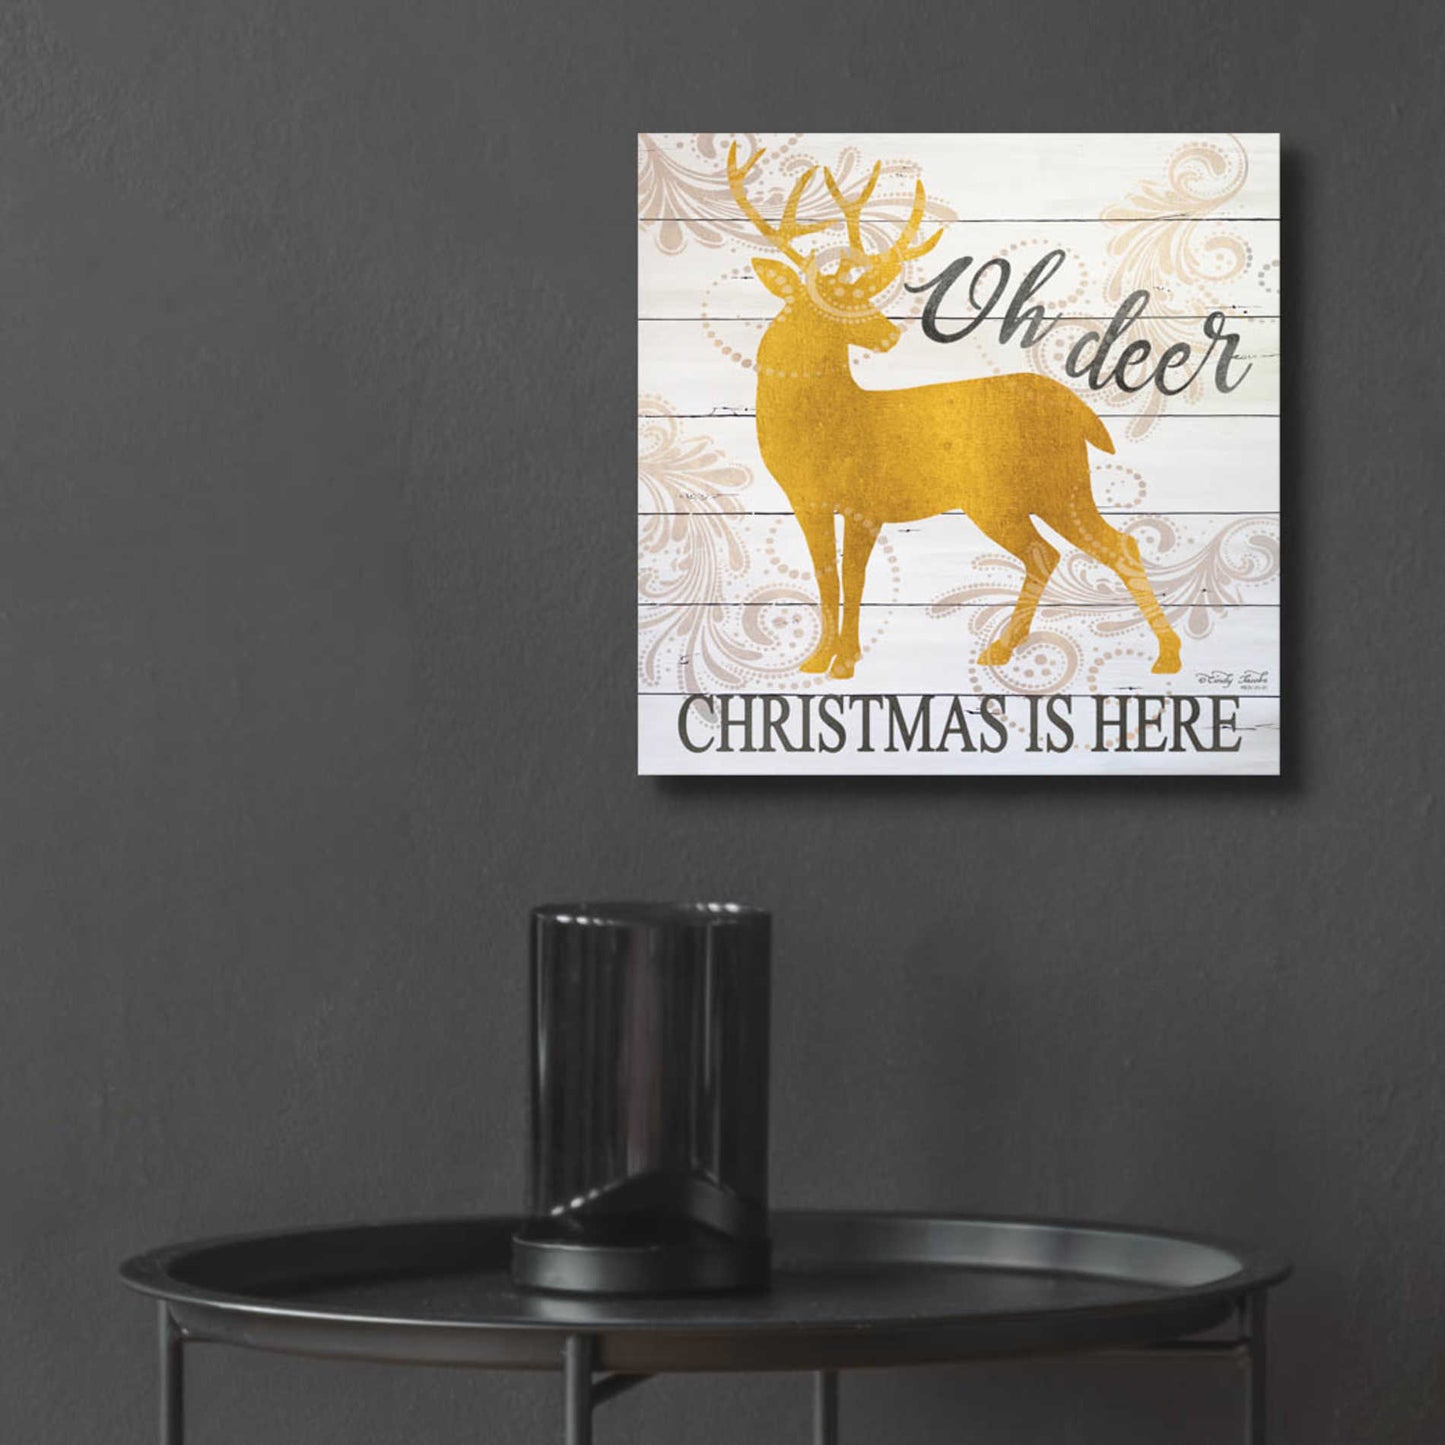 Epic Art 'Oh Deer Christmas is Here' by Cindy Jacobs, Acrylic Glass Wall Art,12x12